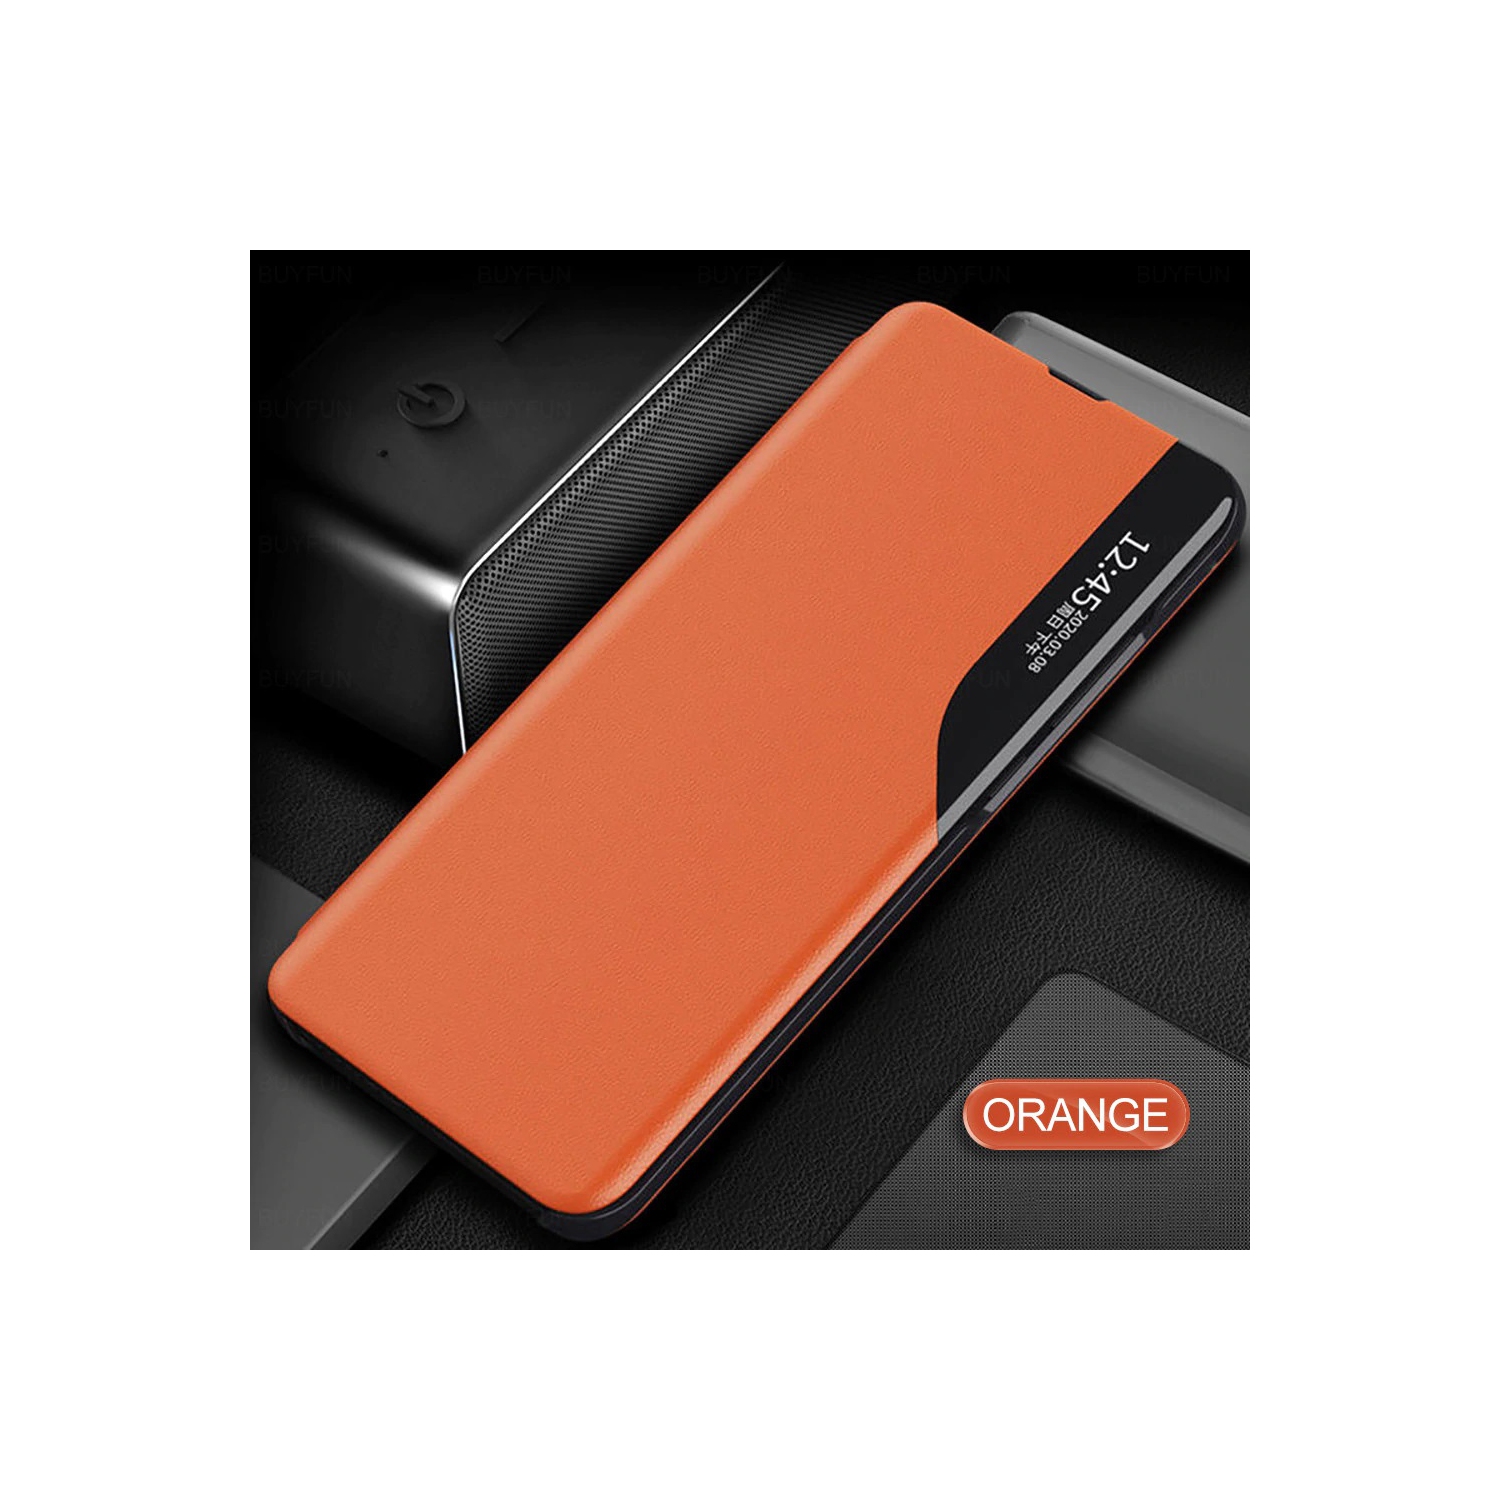 Smart Case window view leather Magnetic stand fundas phone cover Coque for Samsung Galaxy S20 (Orange)